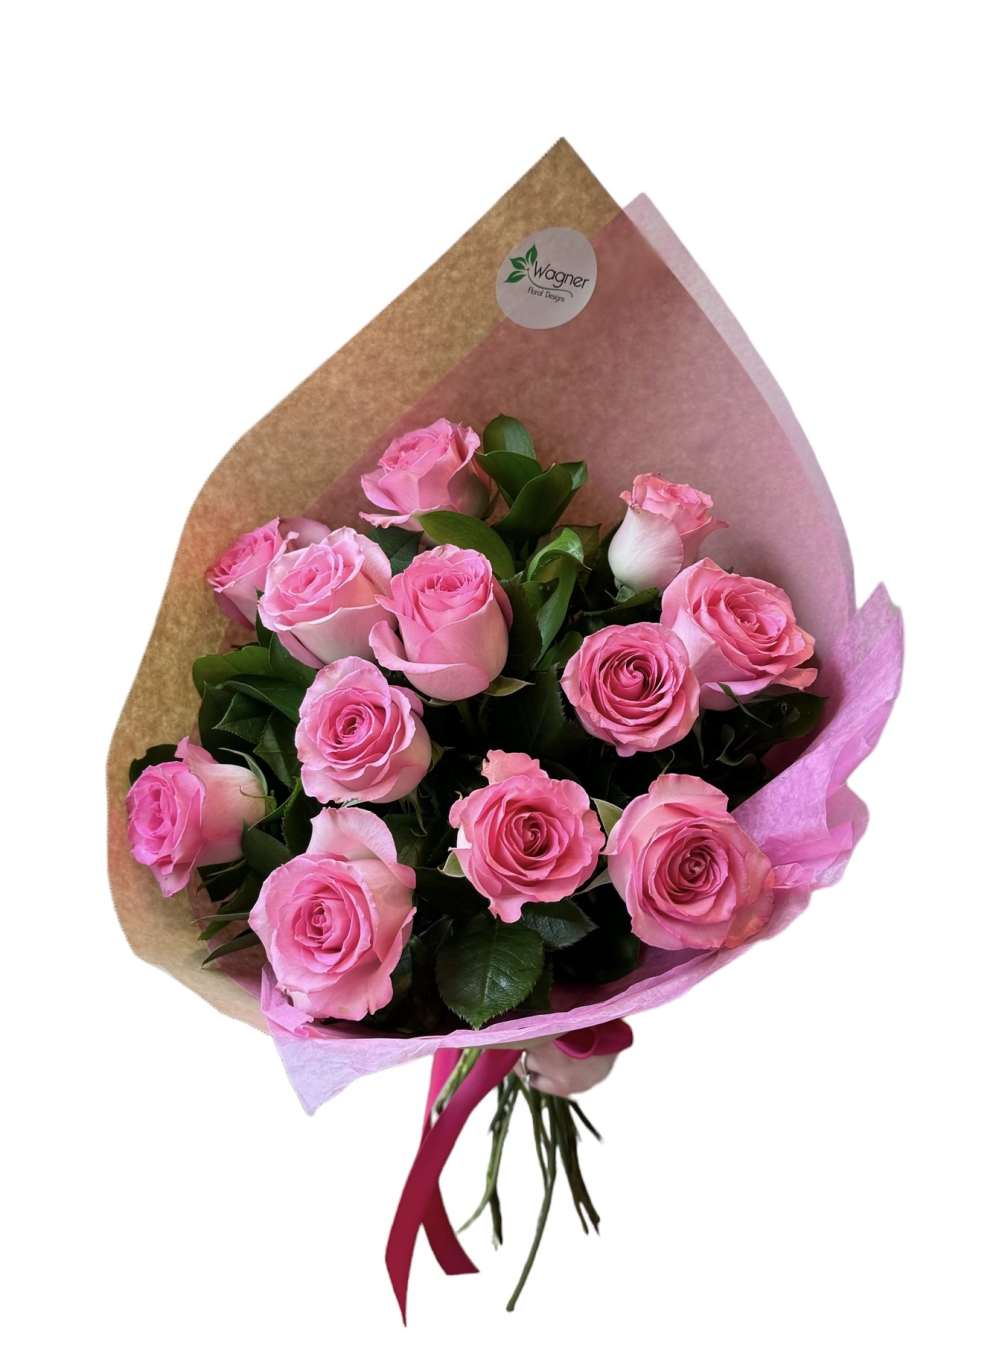 12 light pink roses and greens wrapped hand tied bouquet.
NO VASE INCLUDED